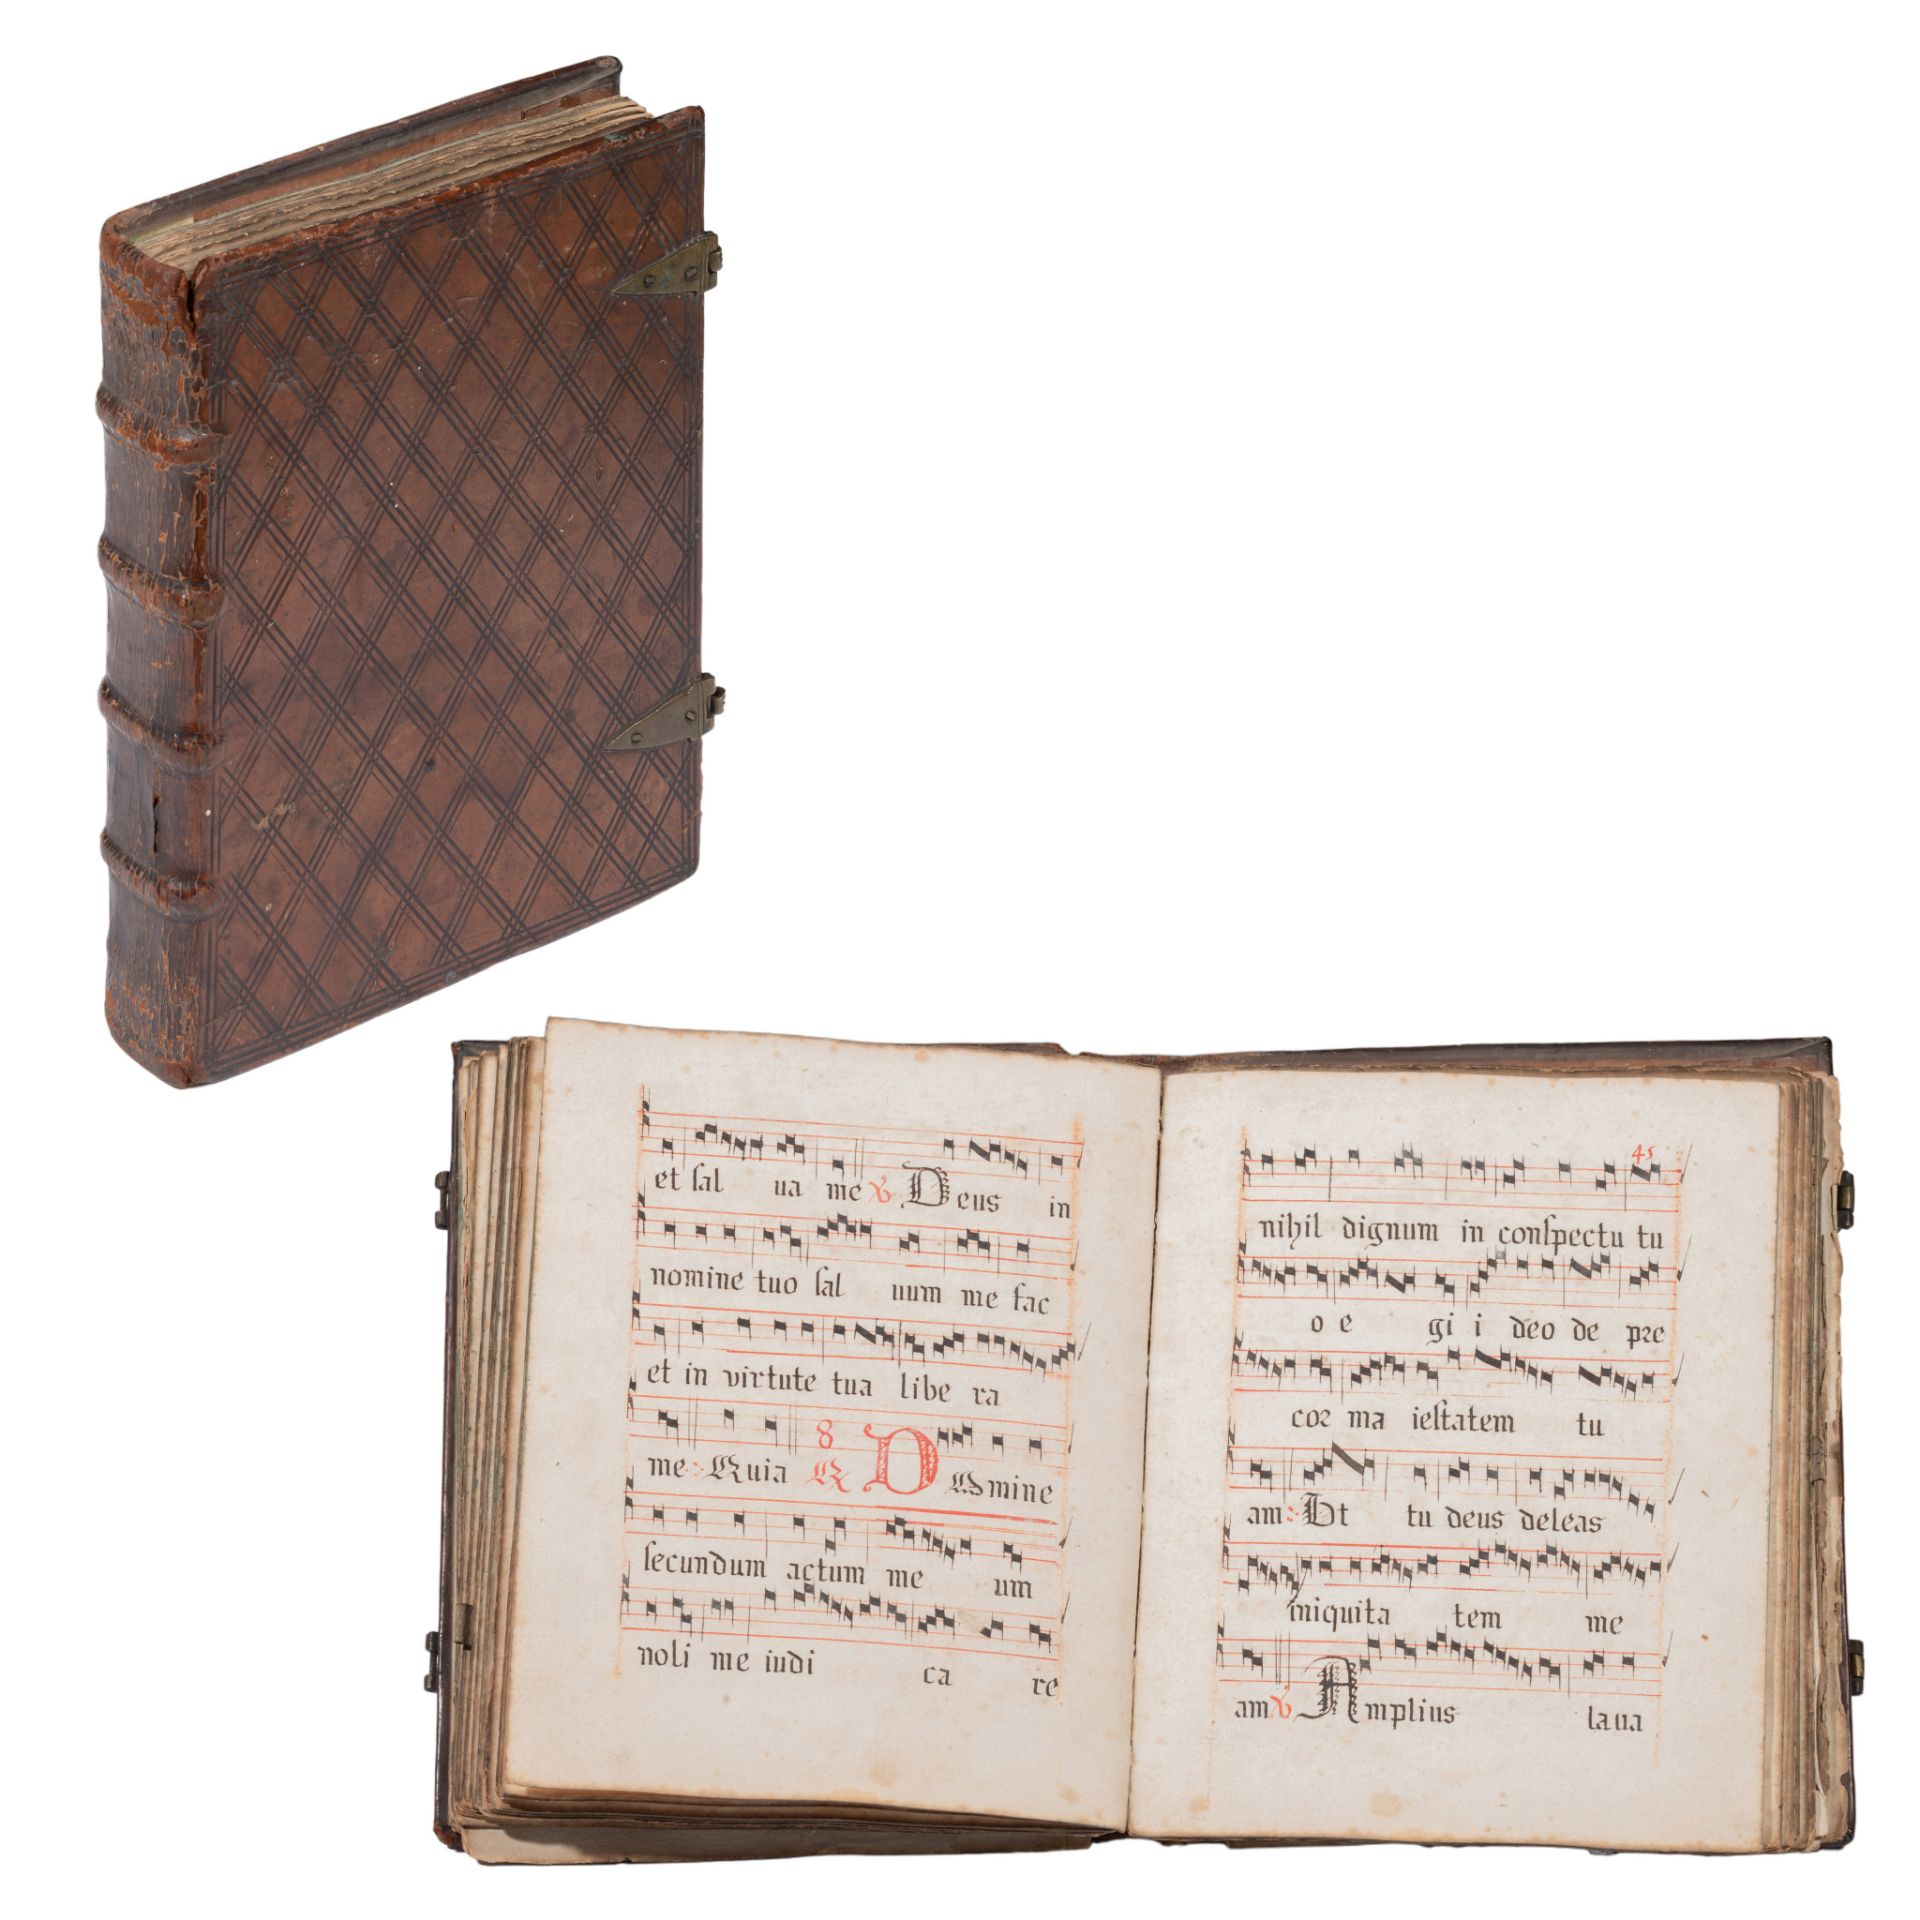 A Flemish psalm manuscript, leather binding with brass clasps, 15th/16thC, 22,5 x 17 cm